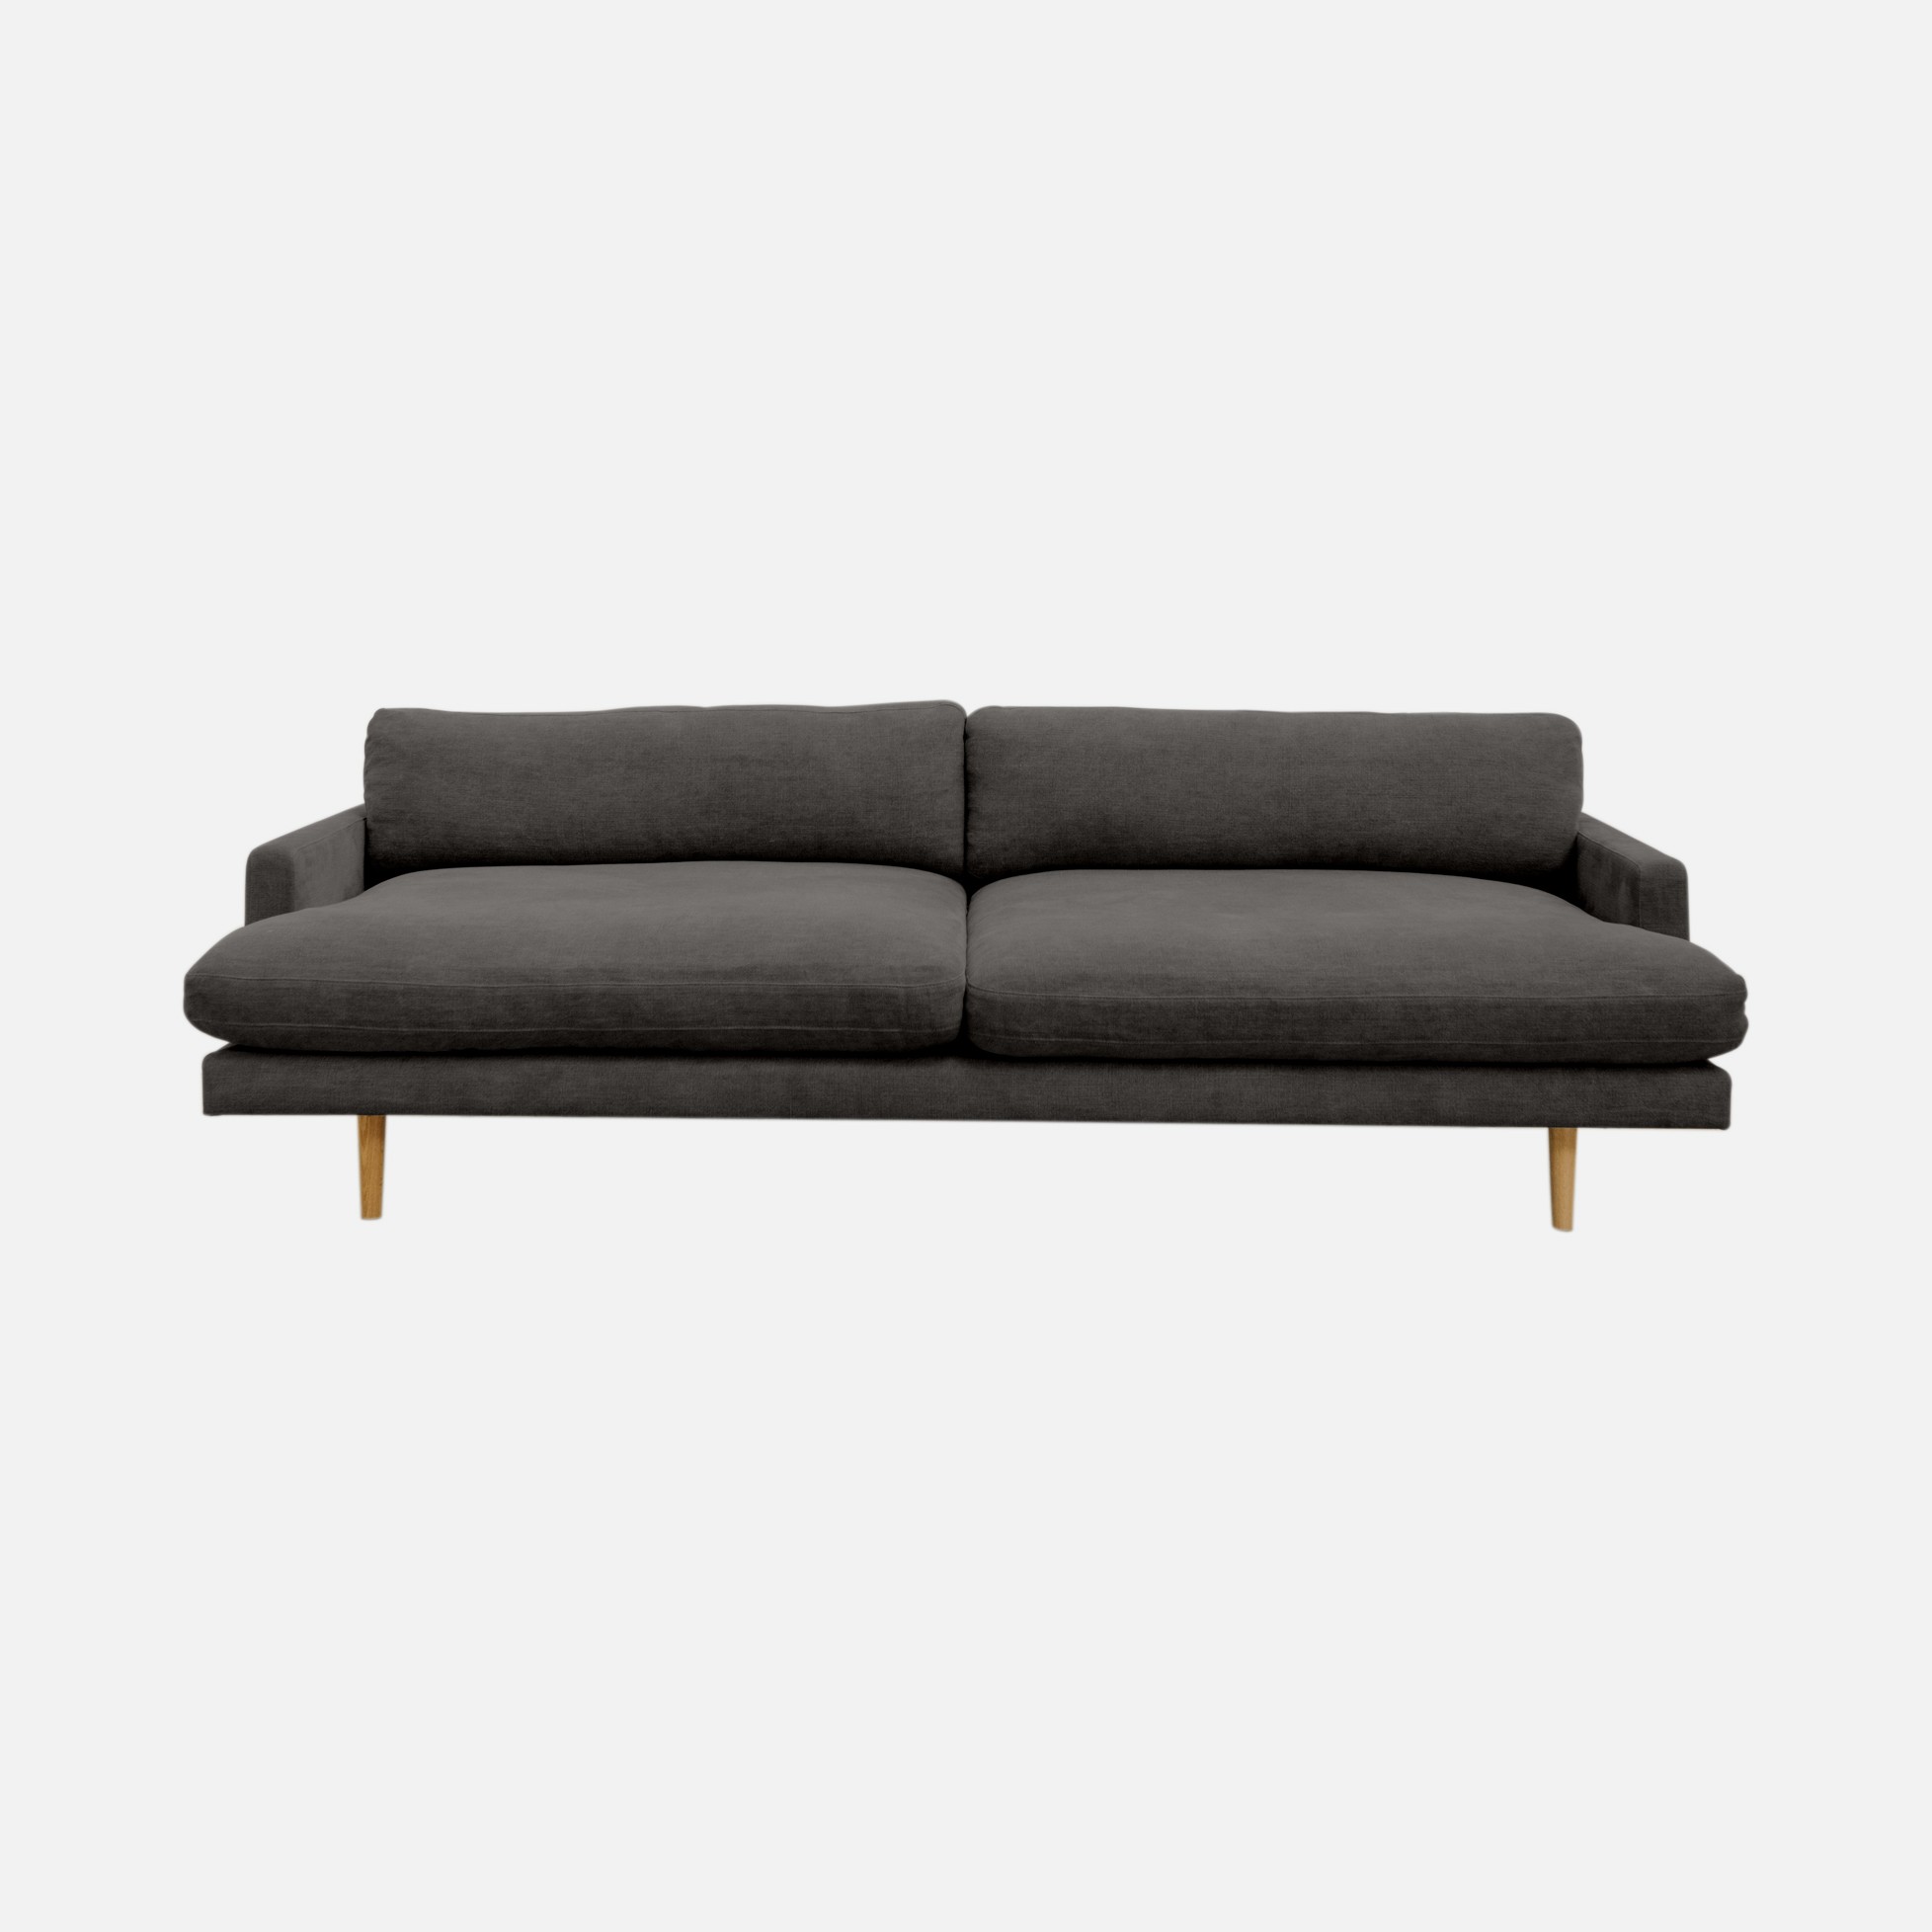 a gray couch with a wooden legs